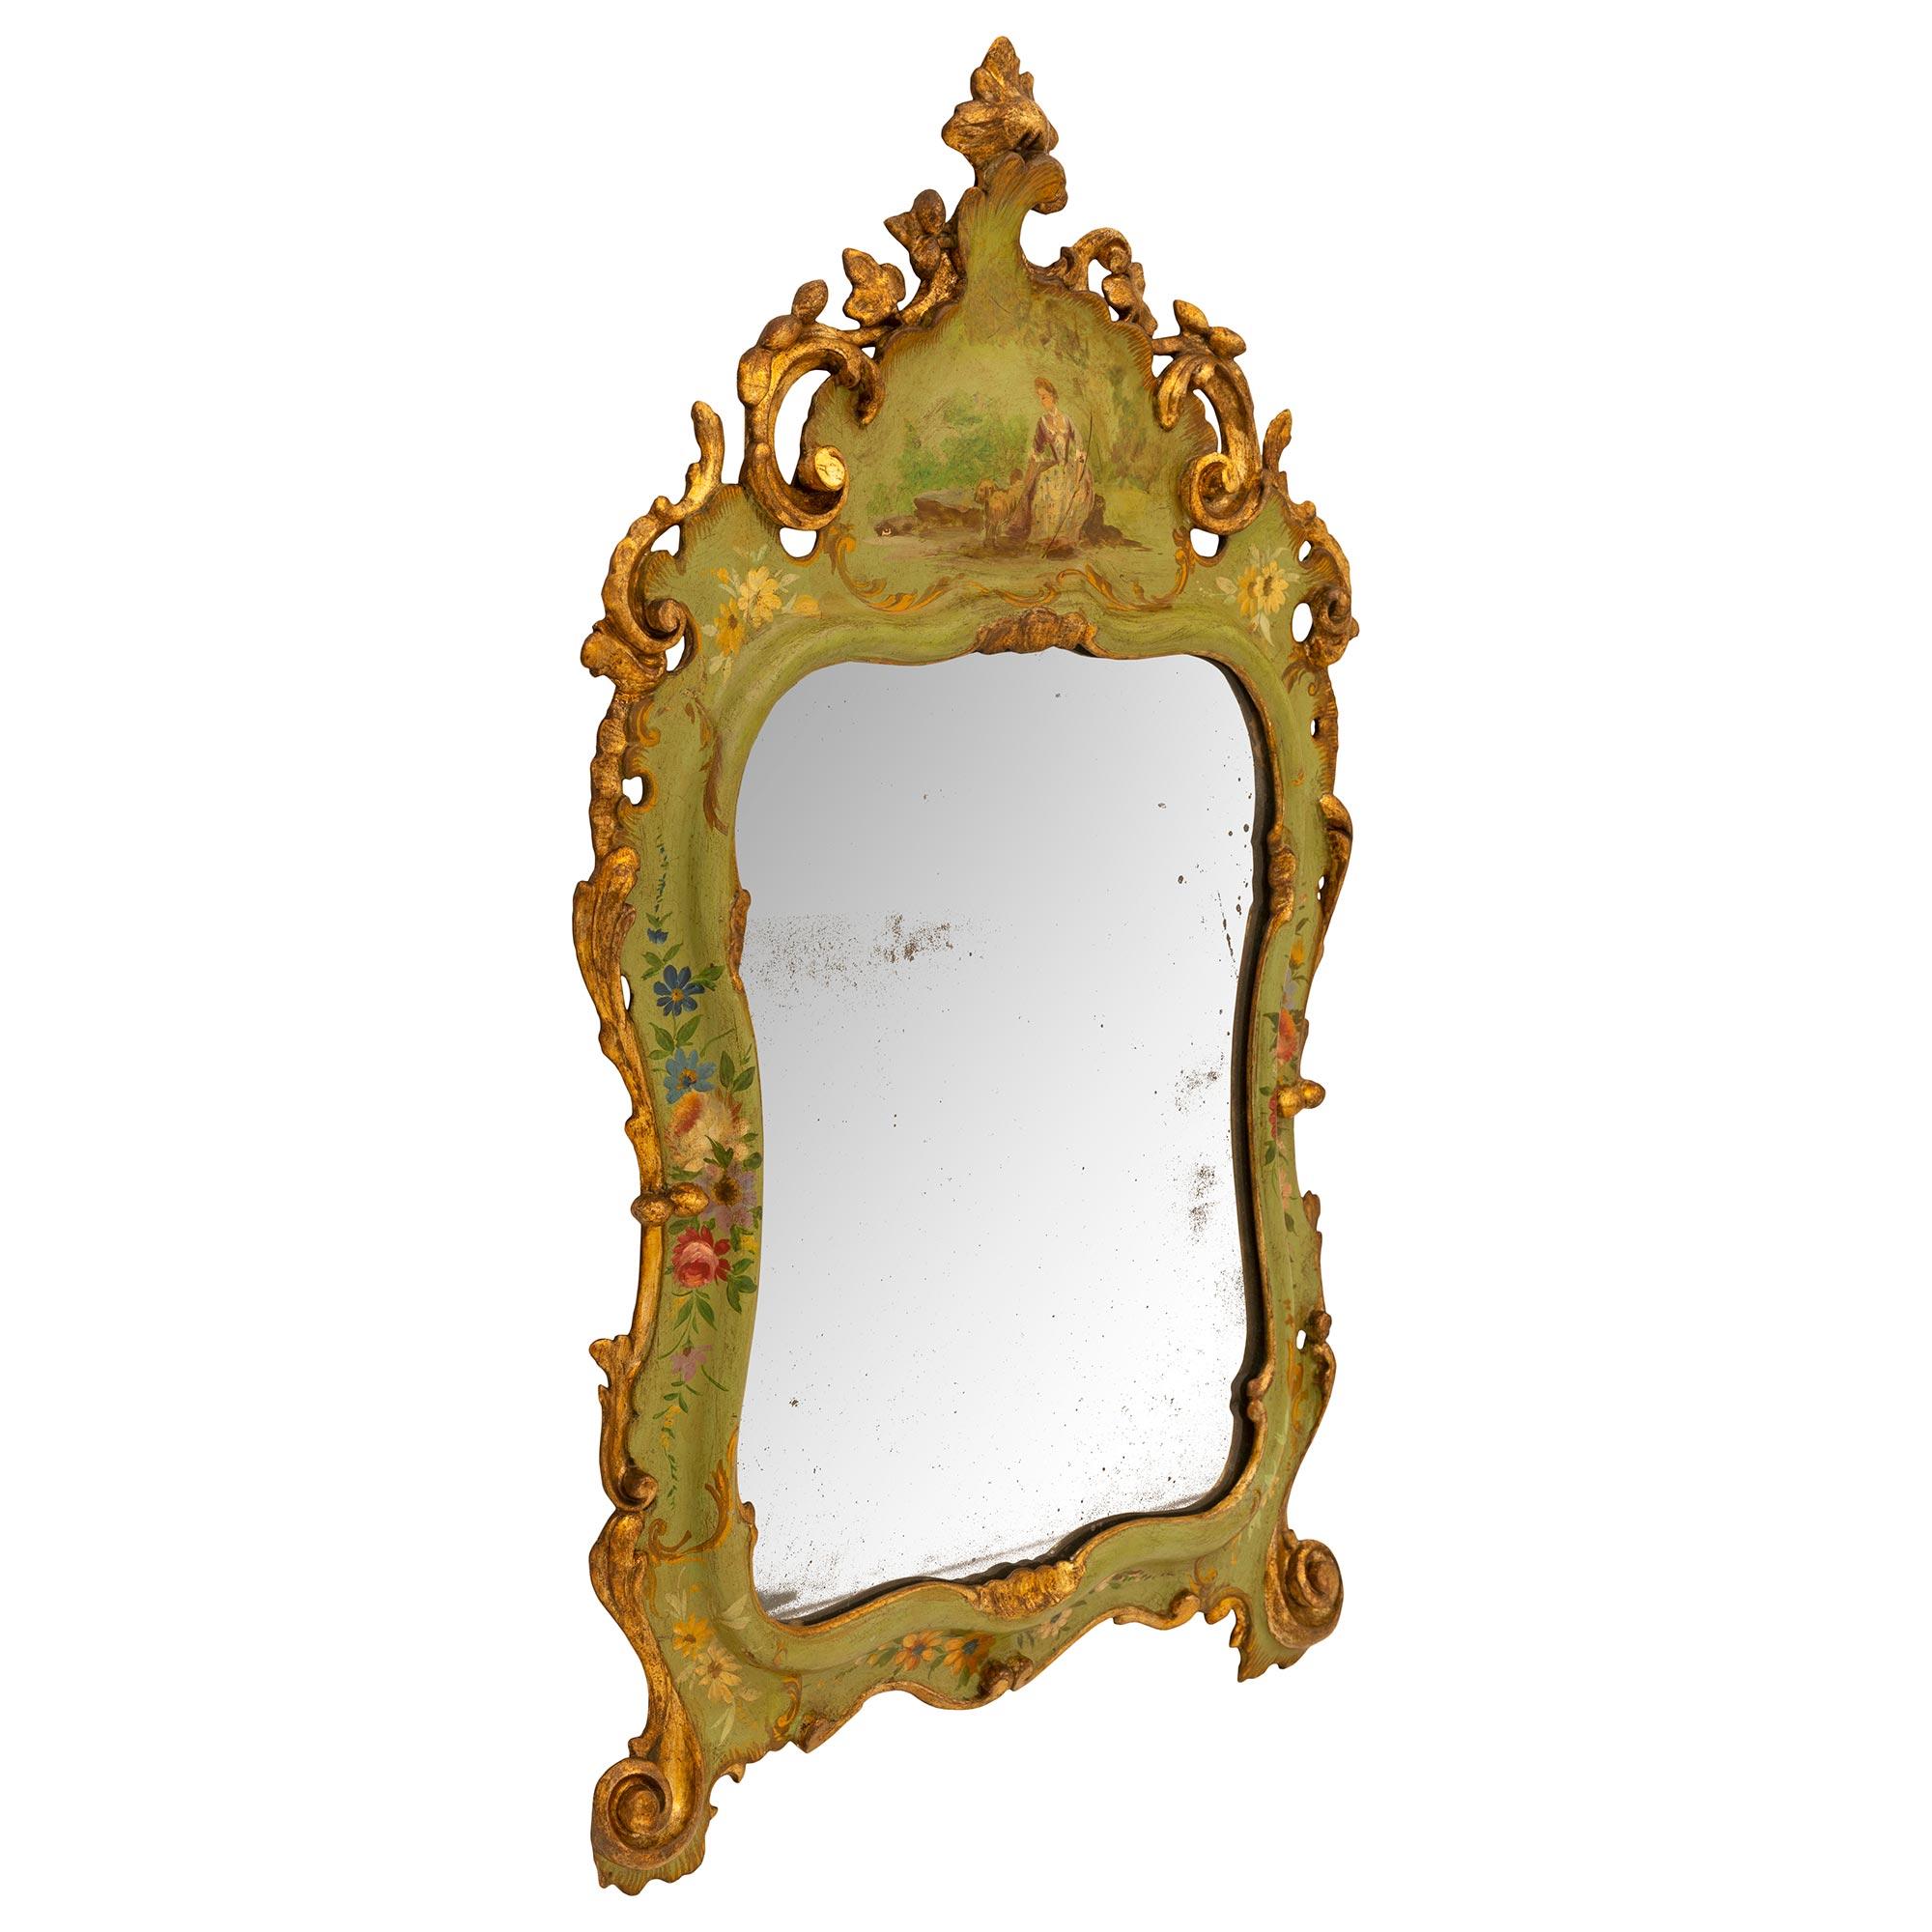 A charming and most decorative true pair of Italian 19th century Venetian st. patinated wood mirrors. Each small mirror retains their original mirror plates framed within an elegant scalloped gilt border with lovely finely detailed hand painted